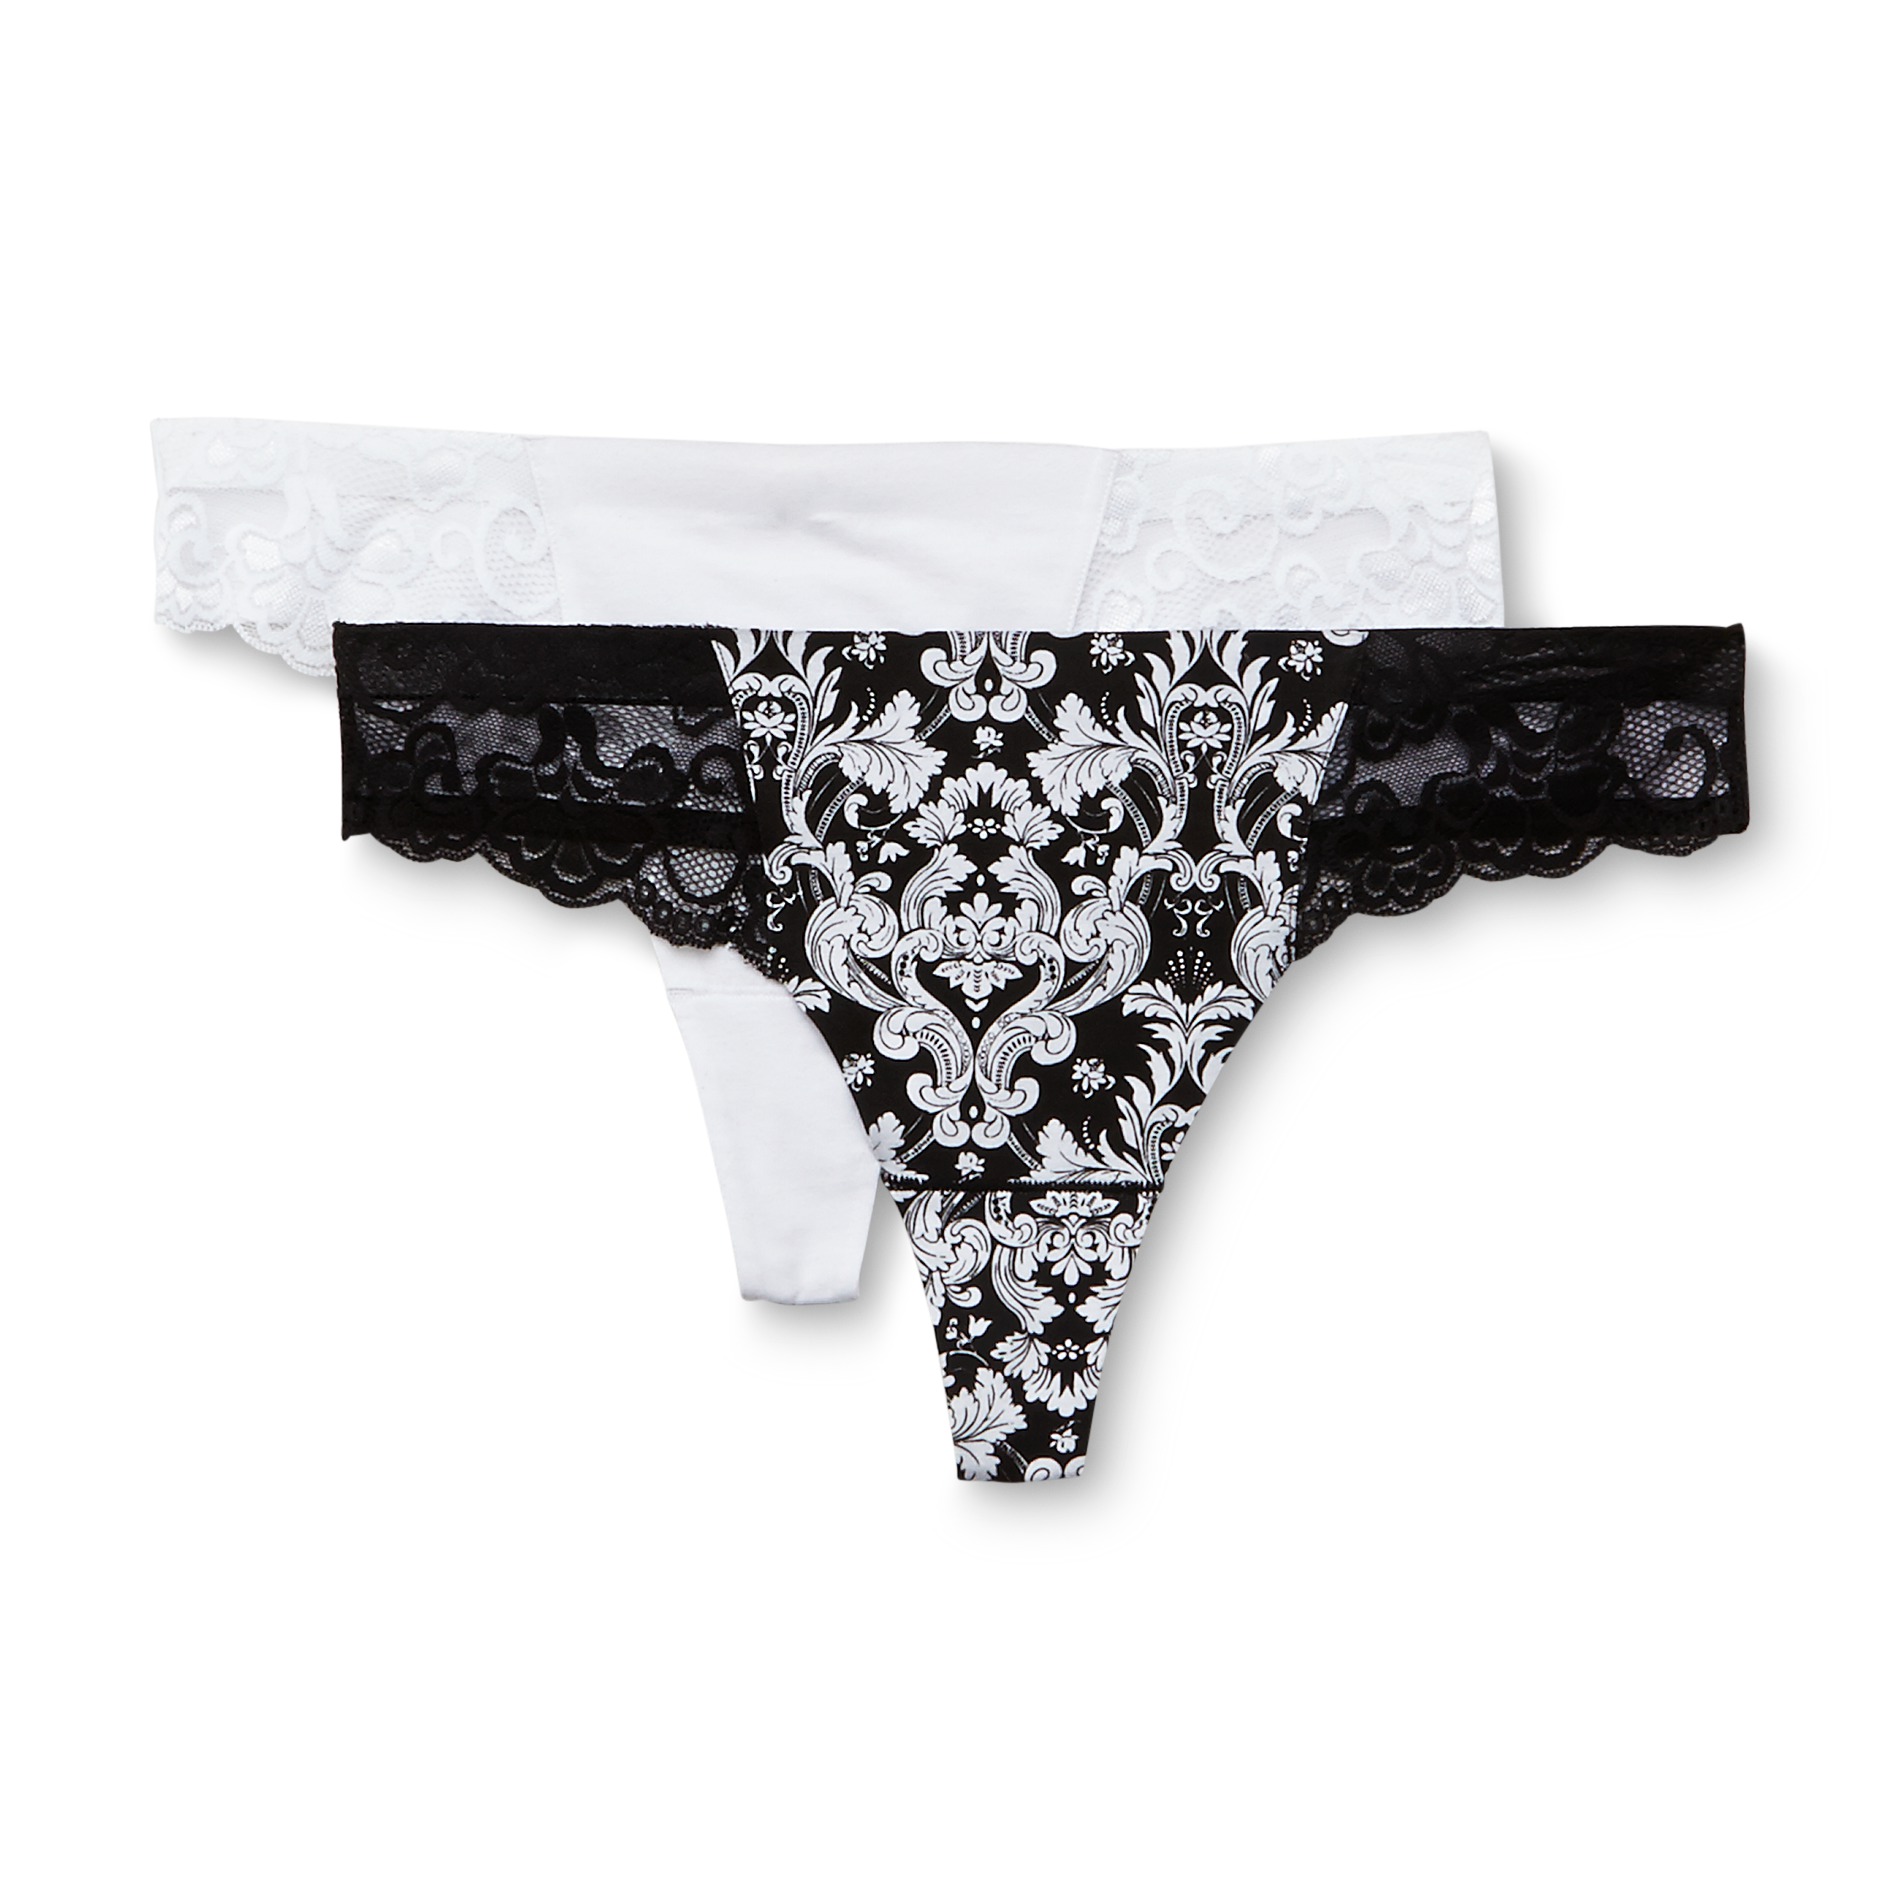 Imagination by Lamour Women's 2-Pack Lace-Trim Thong Panties - Damask